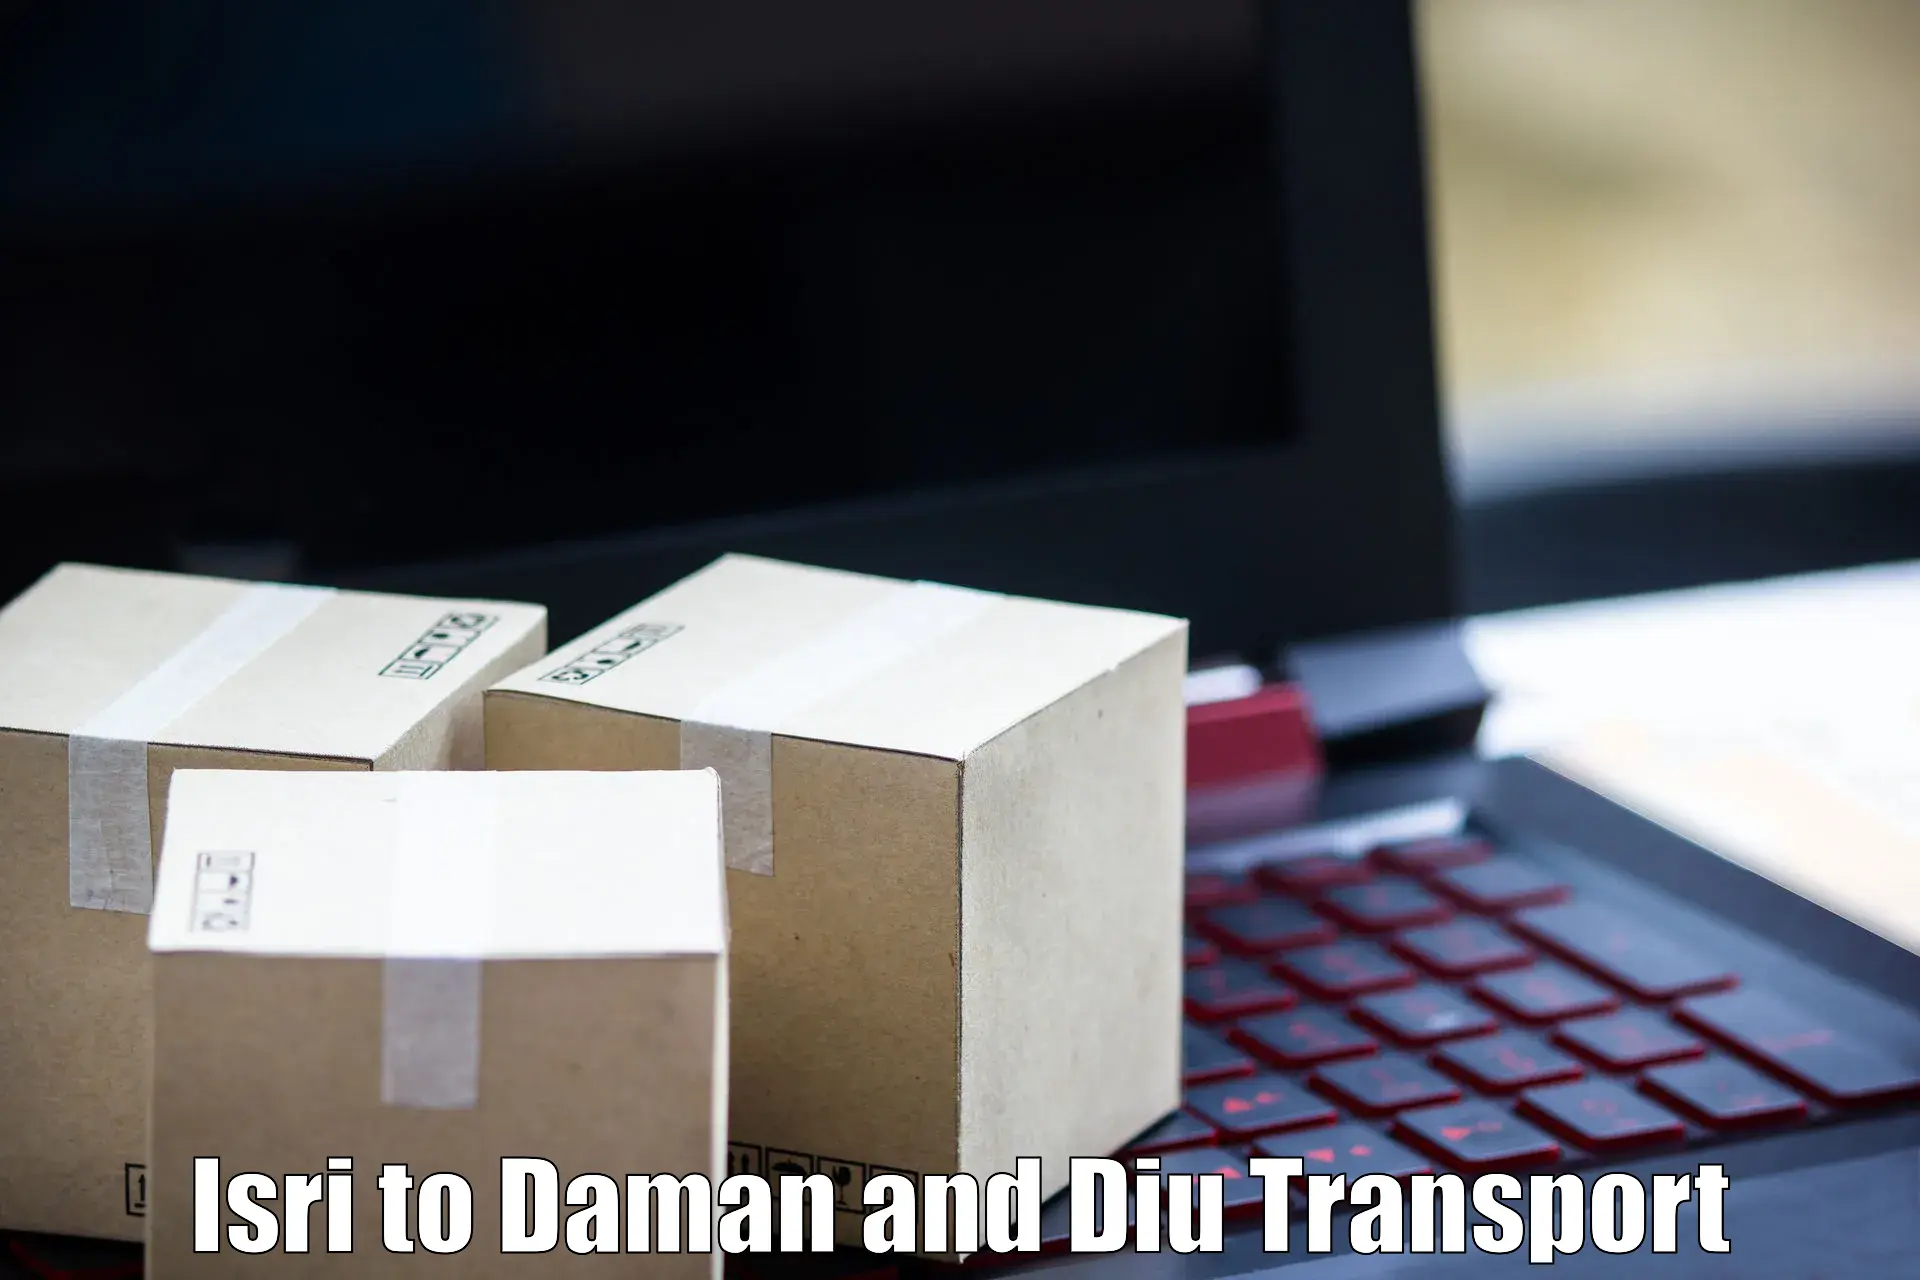 Daily parcel service transport in Isri to Daman and Diu